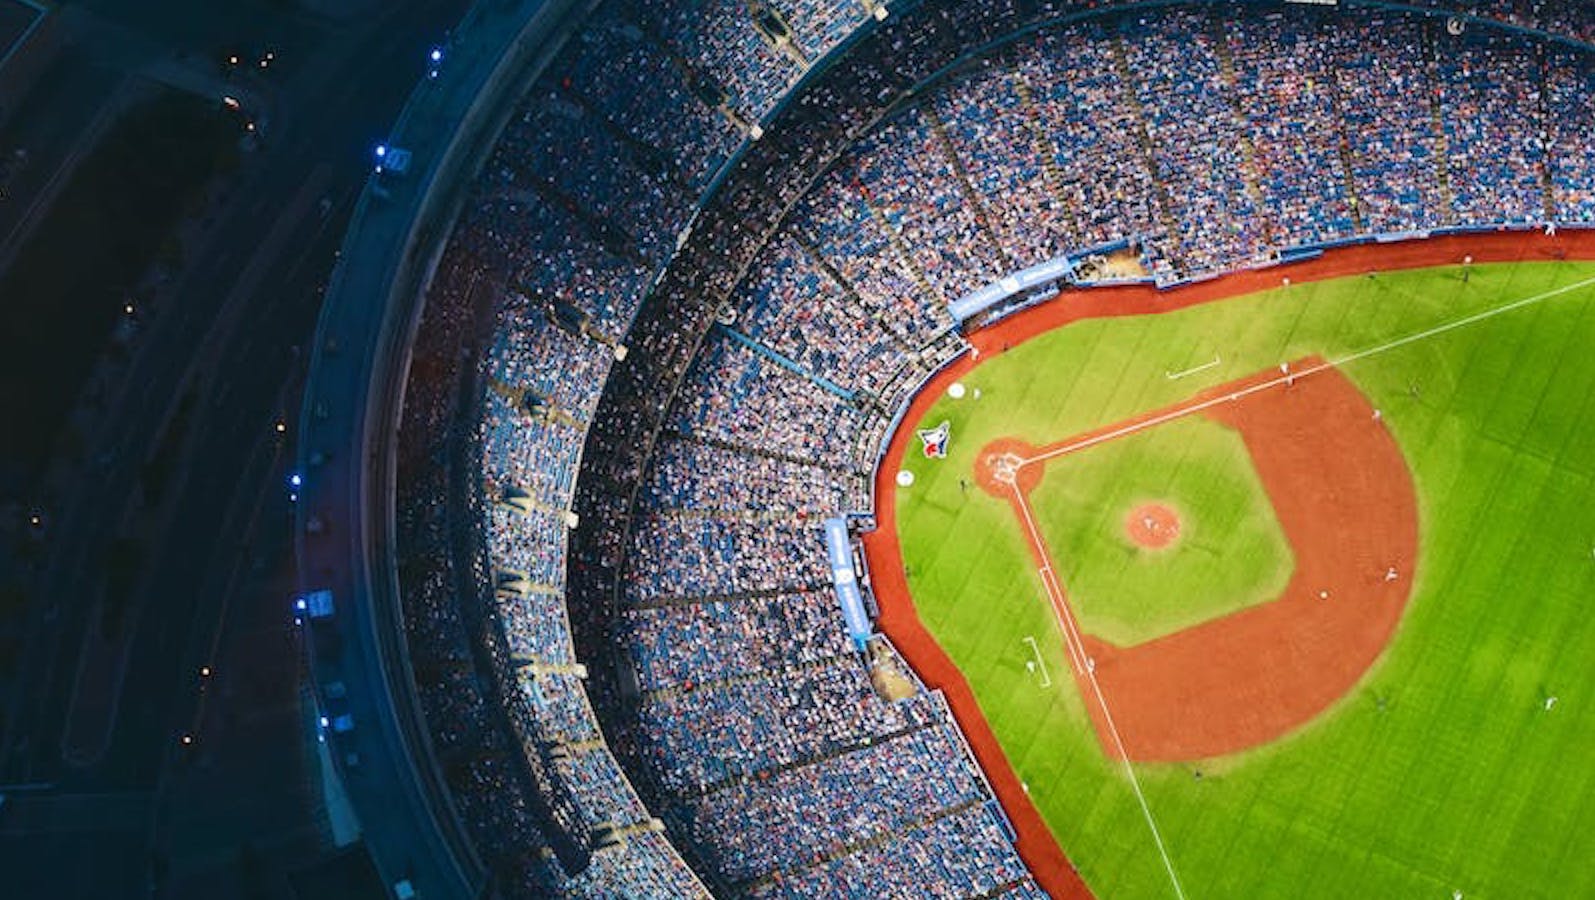 Overhead view of a baseball stadium at night with lights on